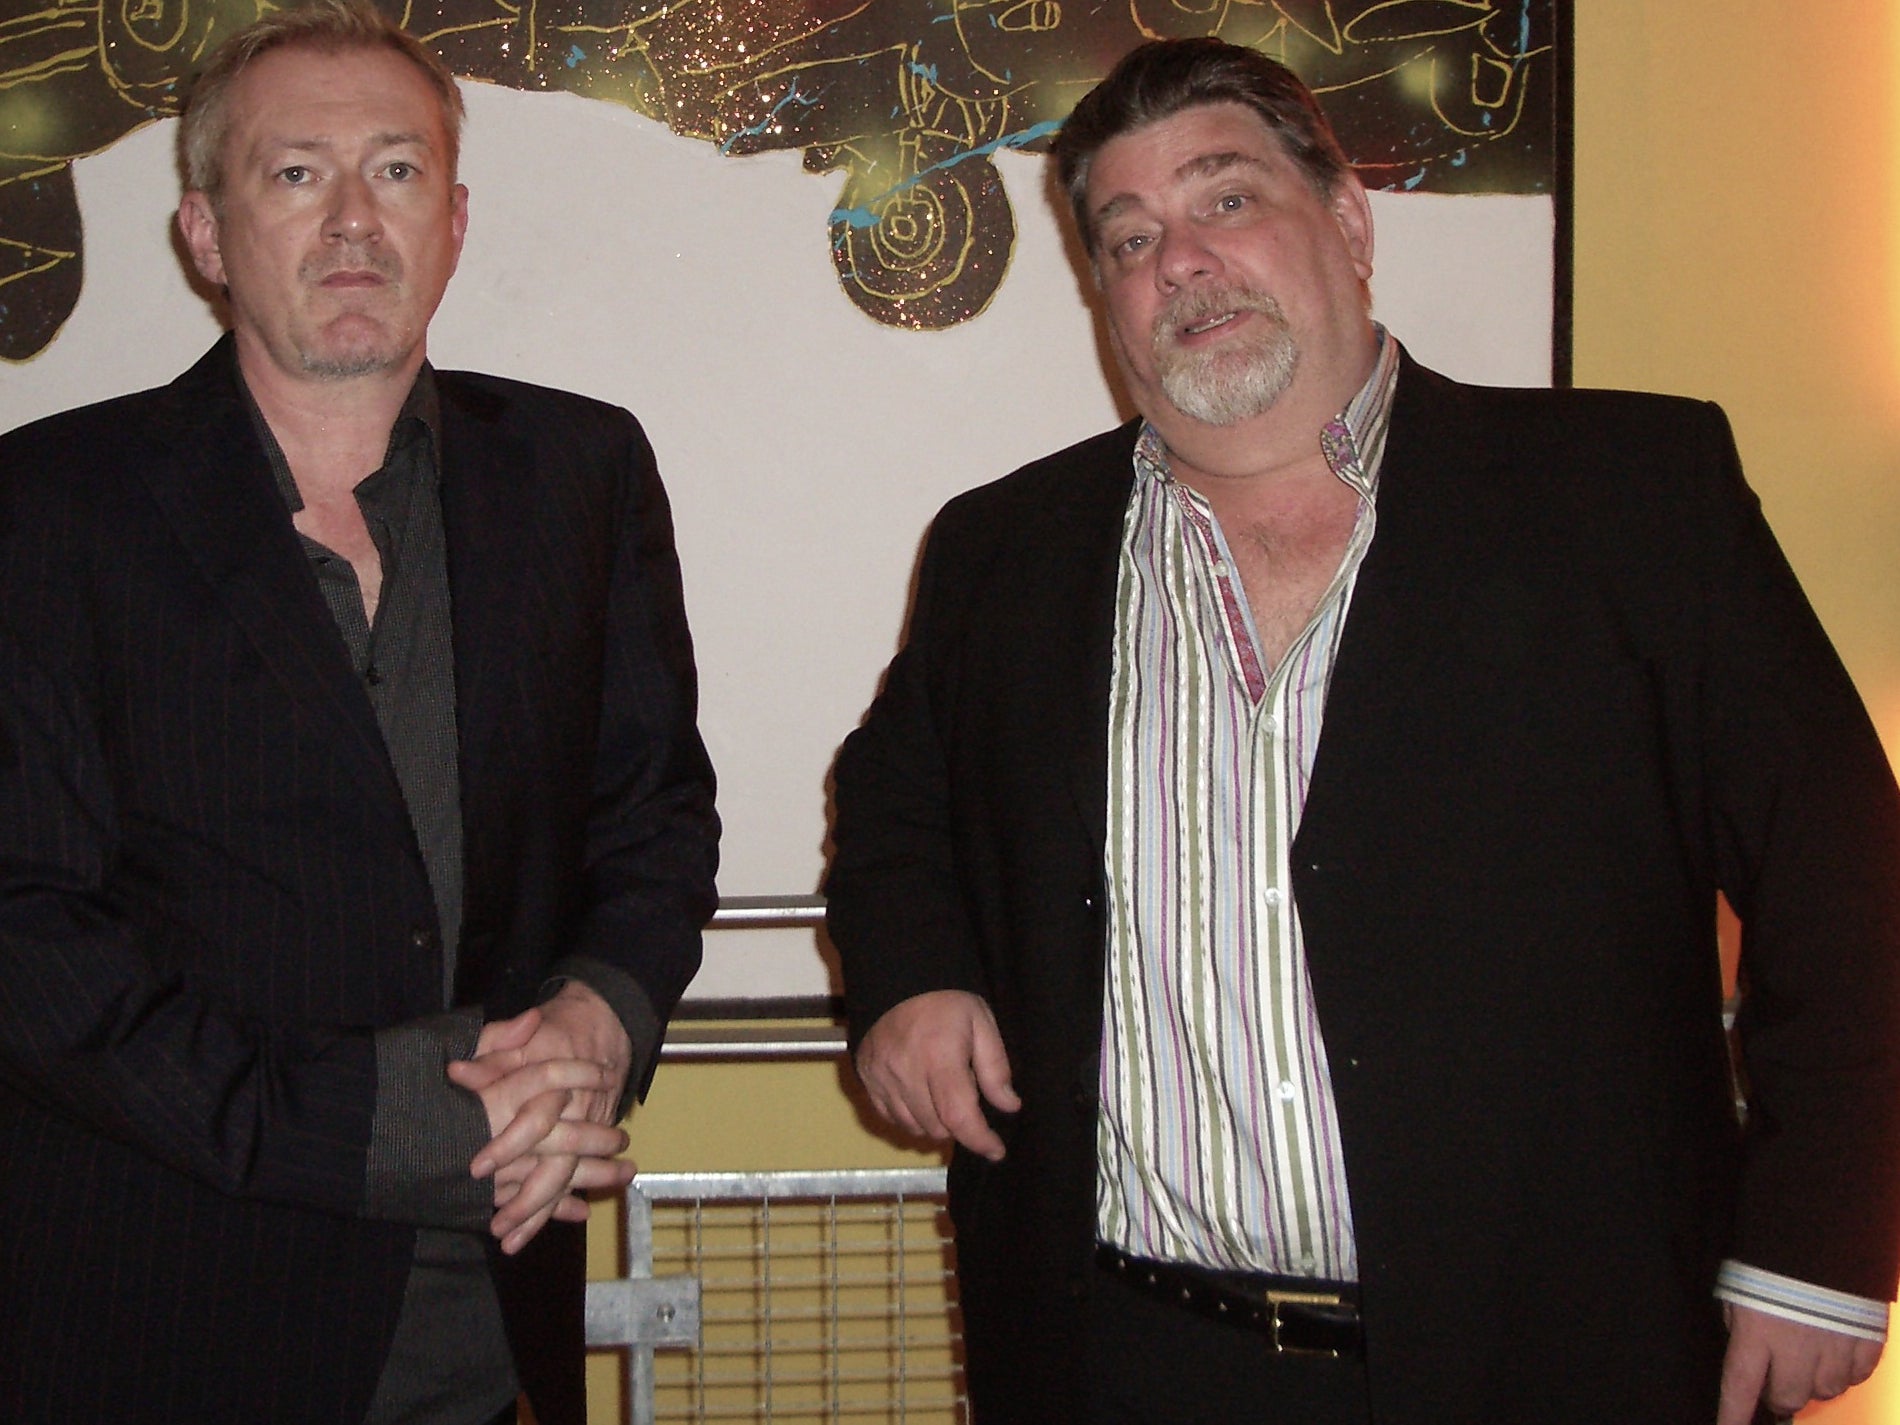 Gill (right) was often mistaken for the Gang of Four musician of the same name